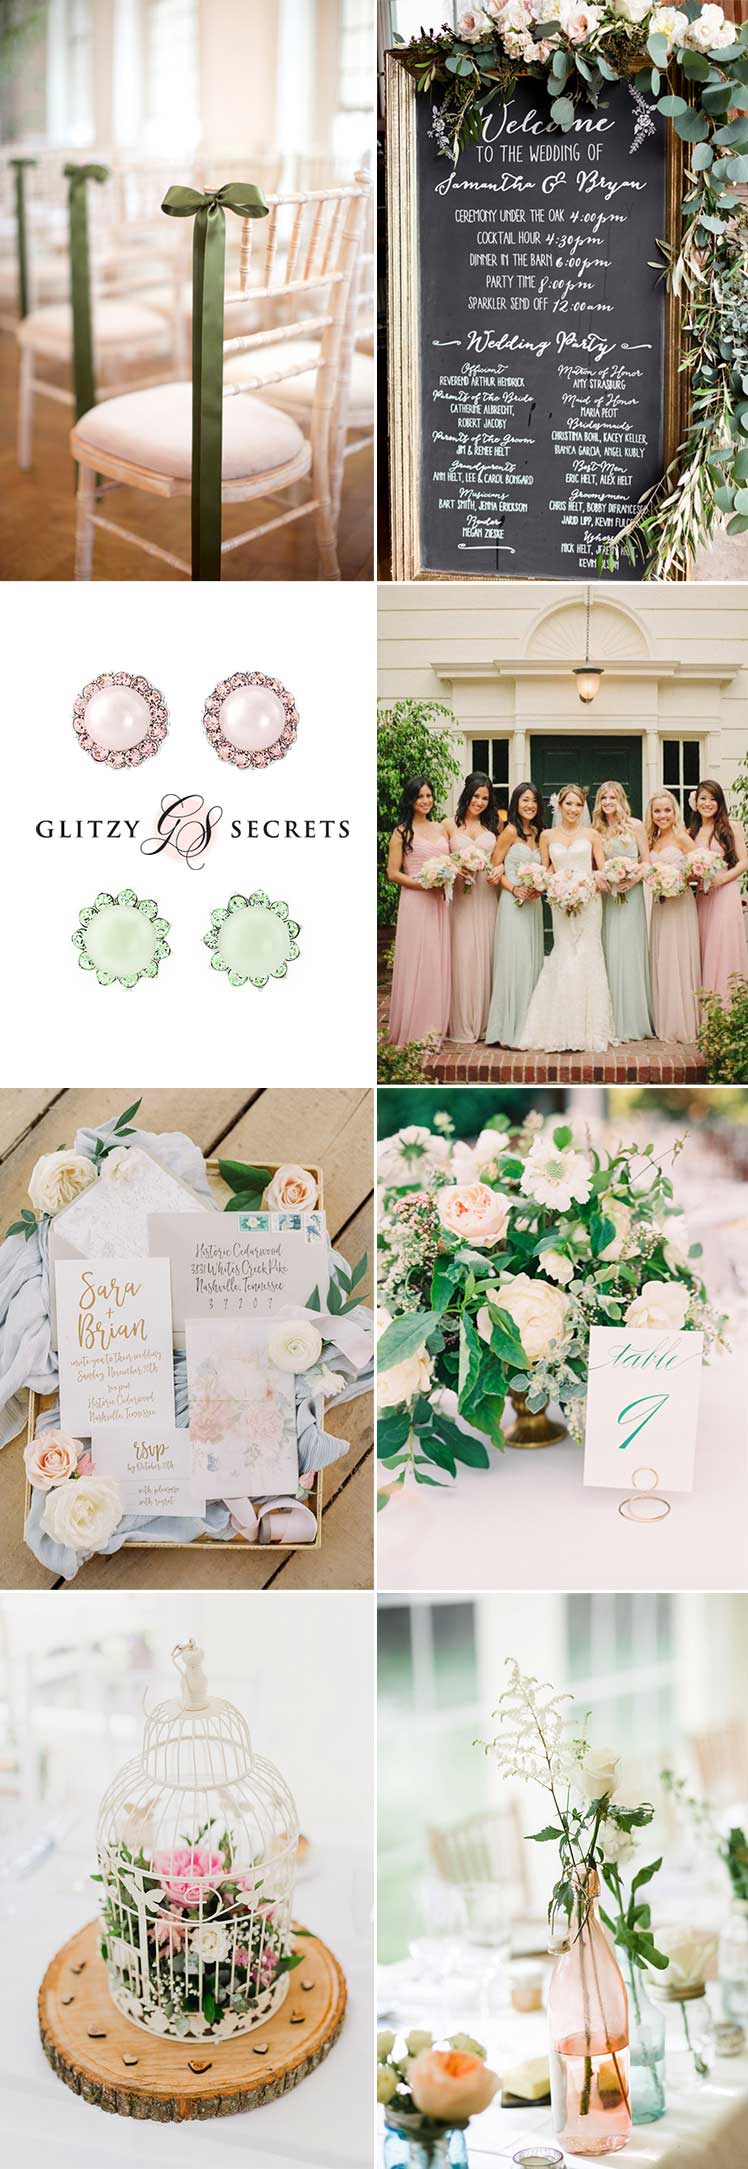 Pastal Pink and green wedding ideas